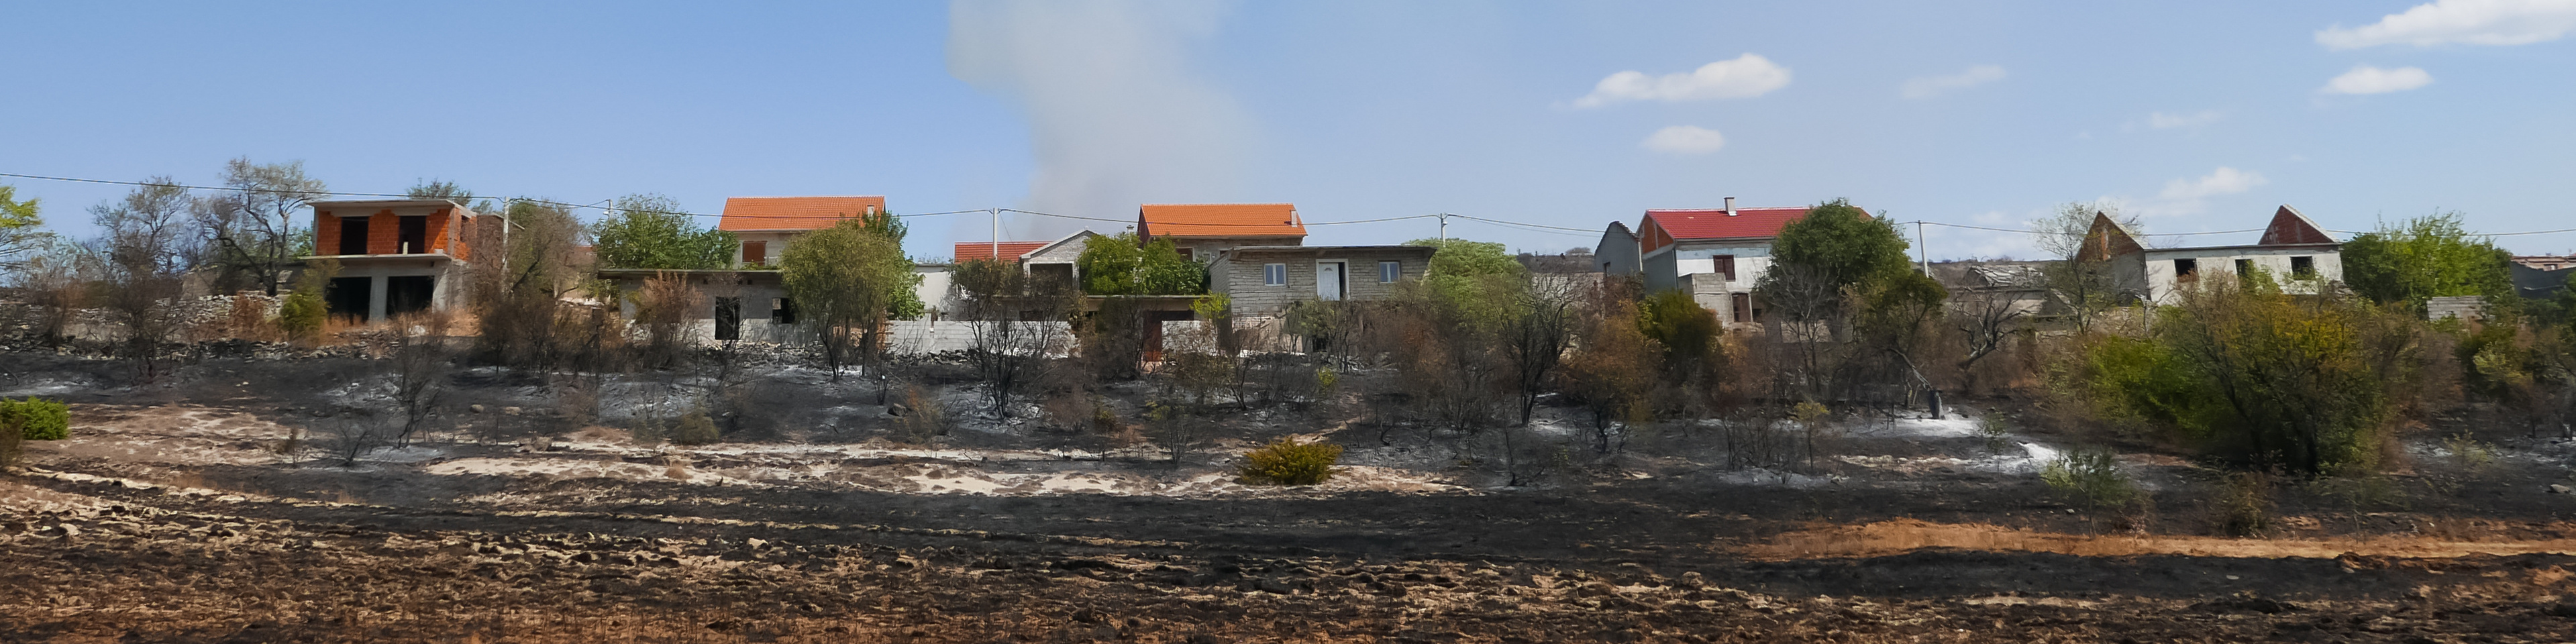 Tax relief for victims of New Mexico wildfires and flooding: IRA and HSA deadlines postponed